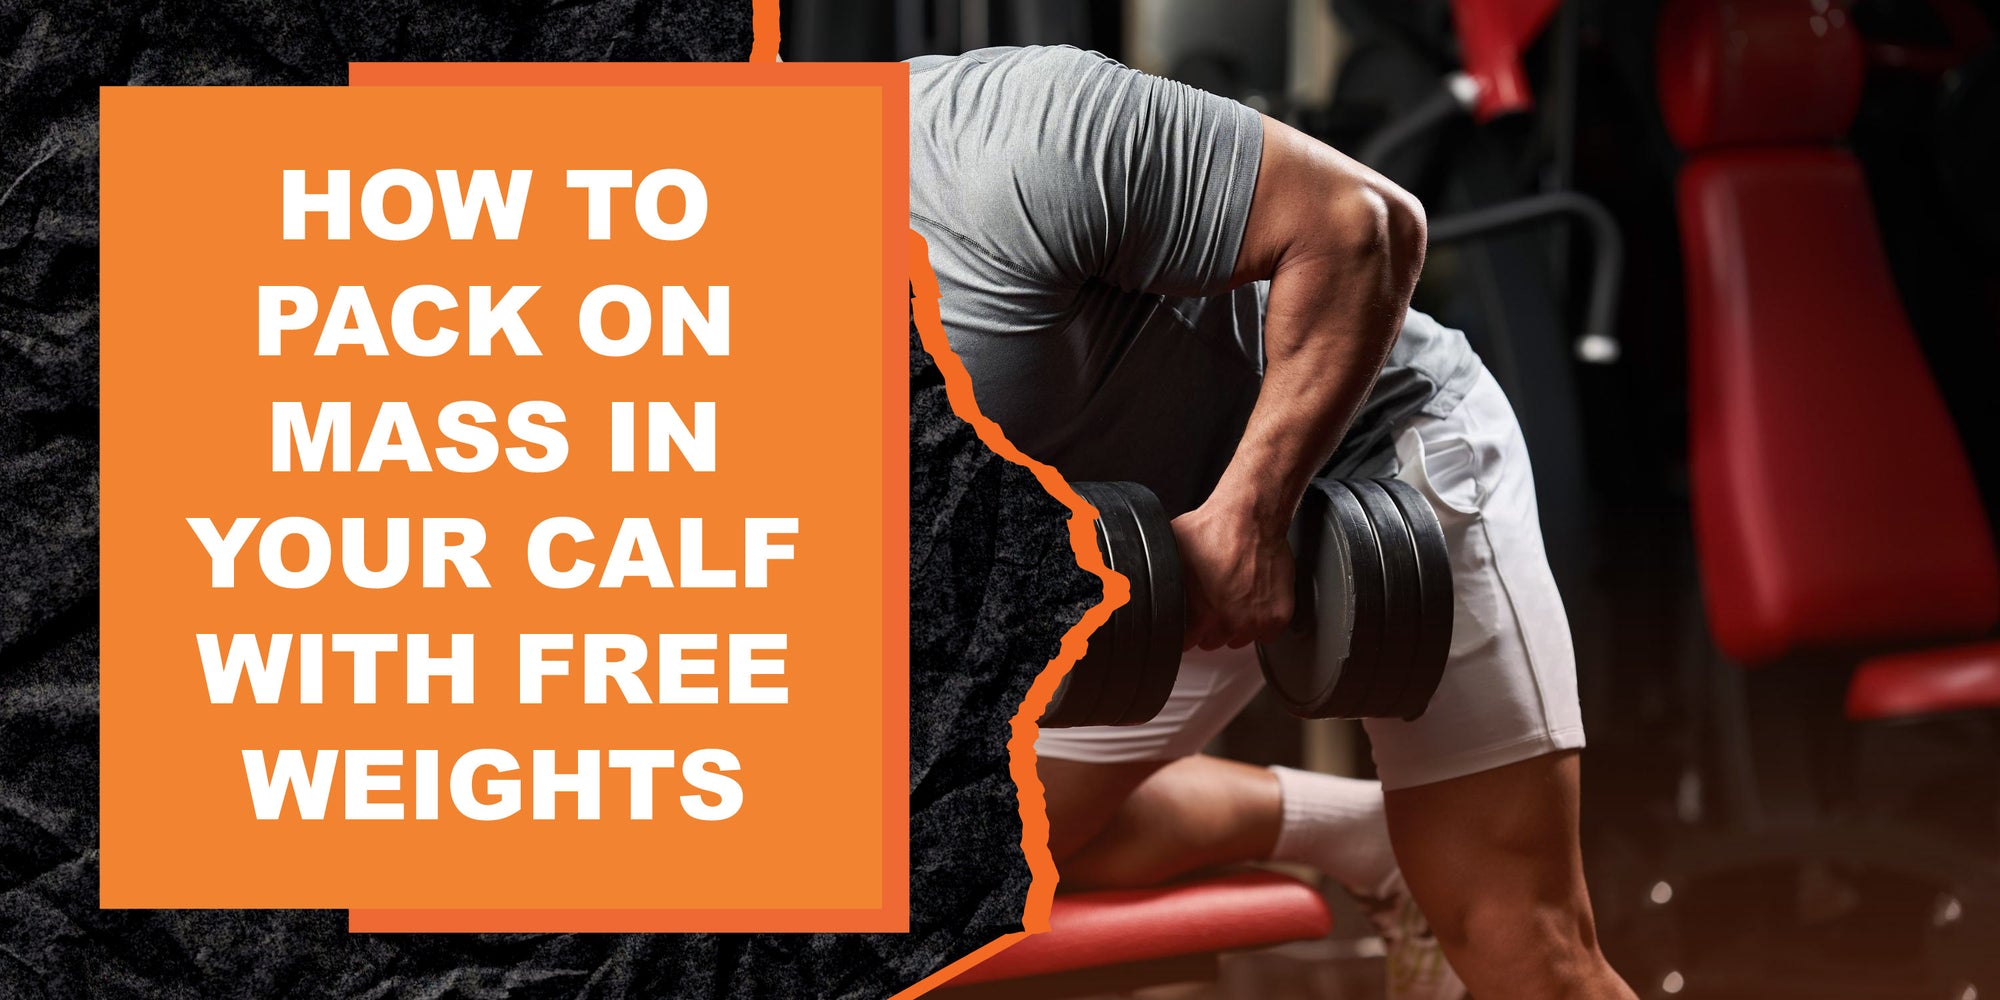 How to Pack on Mass in Your Calf with Free Weights